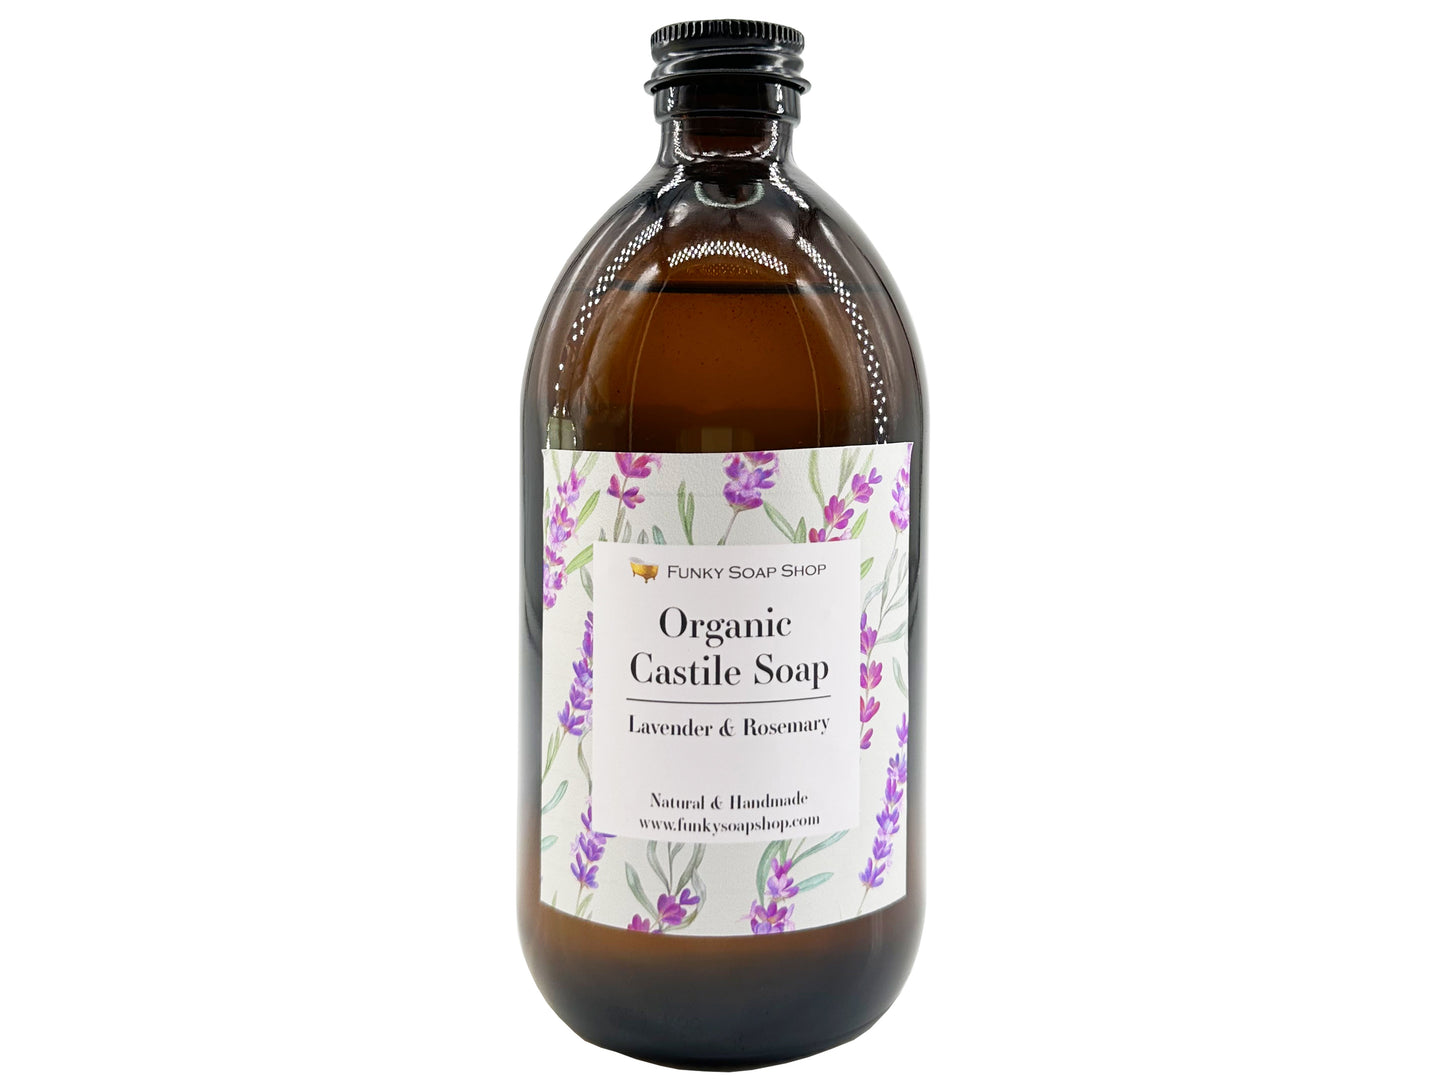 Organic Liquid Castile Soap with Lavender & Rosemary, Glass Bottle - Funky Soap Shop